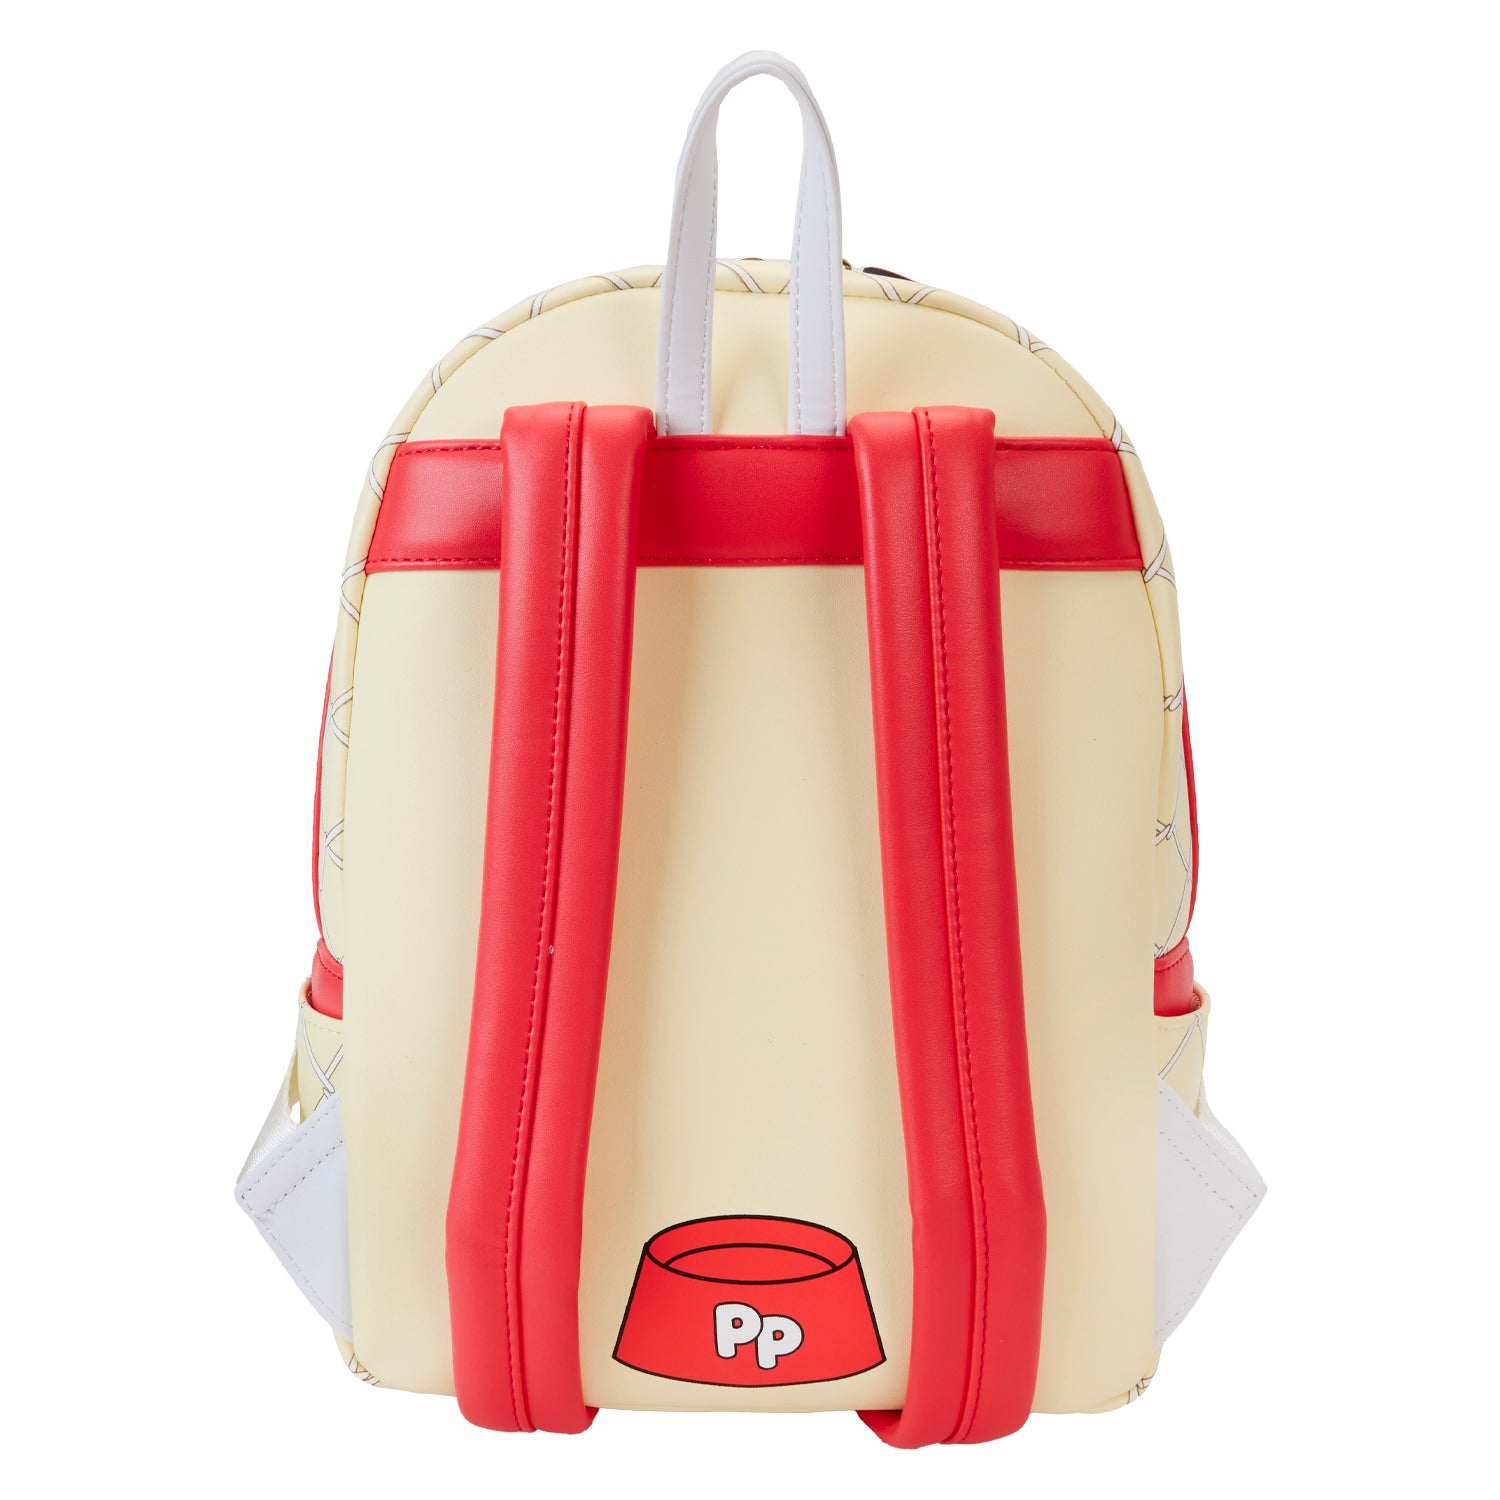 Loungefly Hasbro Pound Puppies 40th Anniversary Mini Backpack